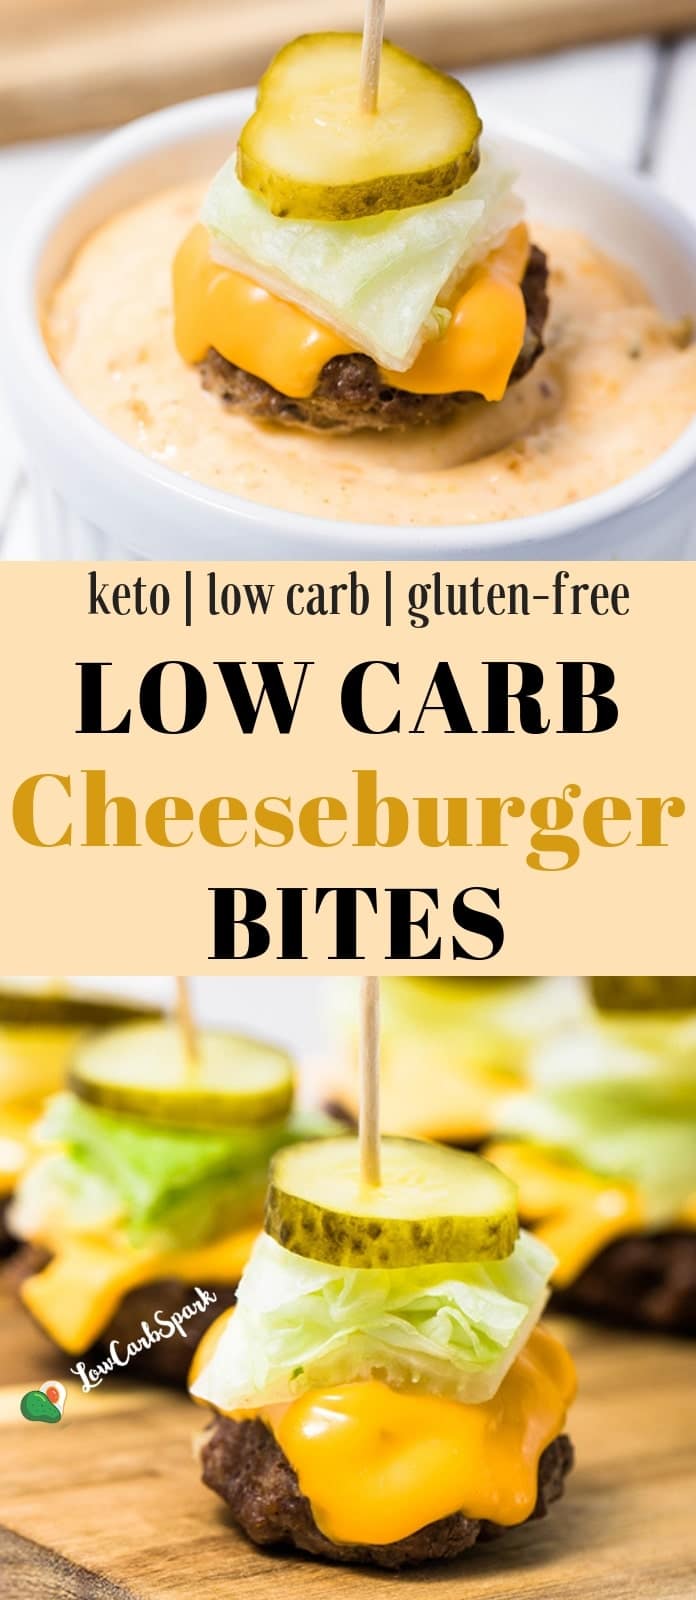 Easy Delicious Low Carb Keto Mini Cheeseburger with Big Mac Sauce